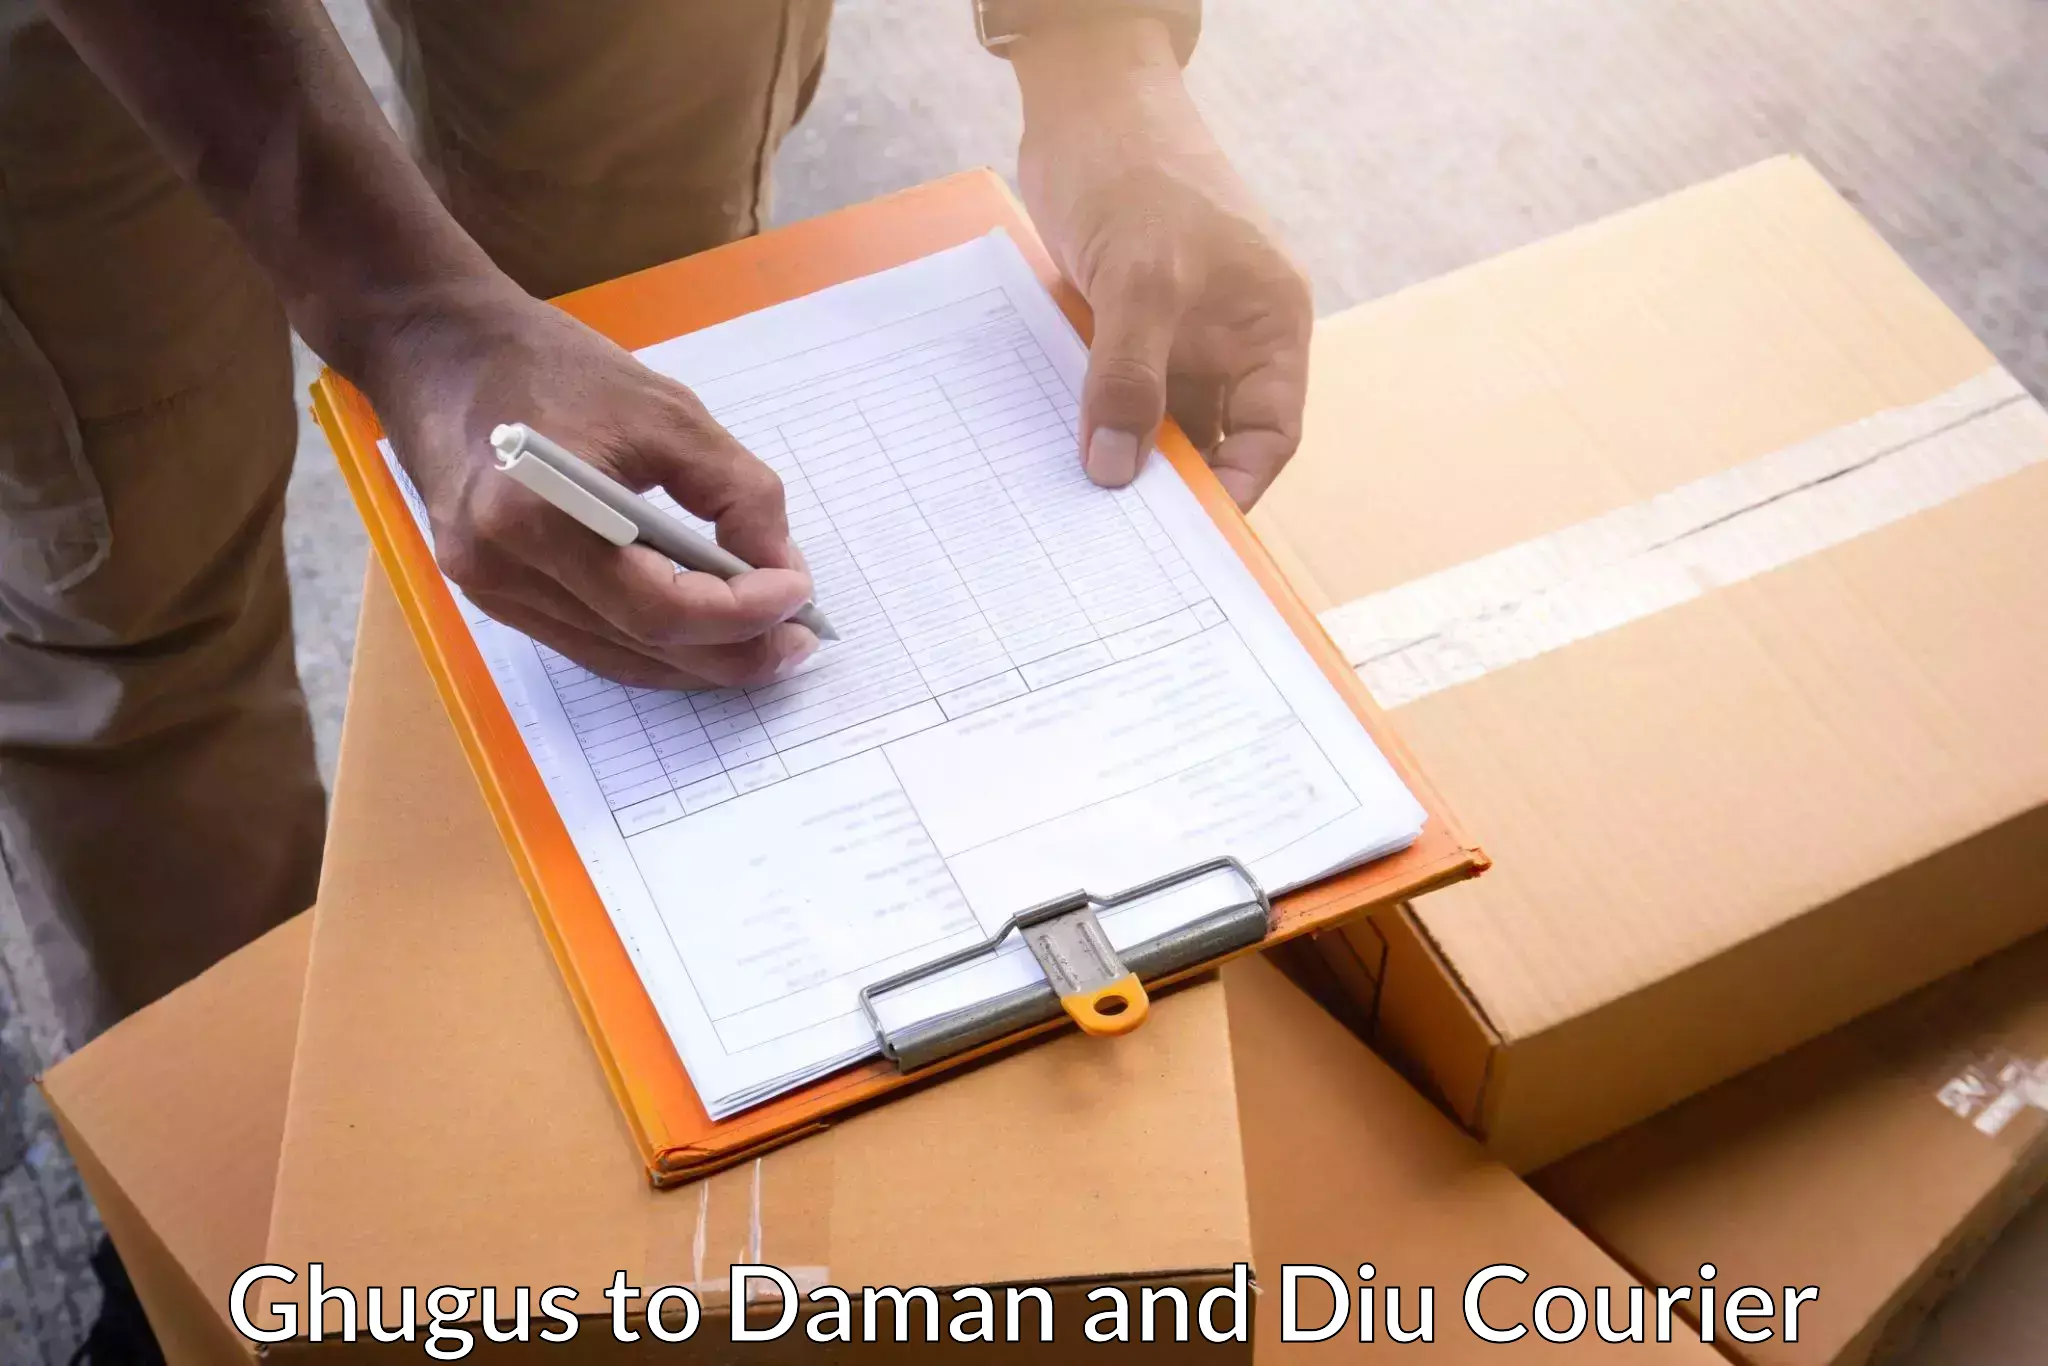 International courier networks Ghugus to Daman and Diu